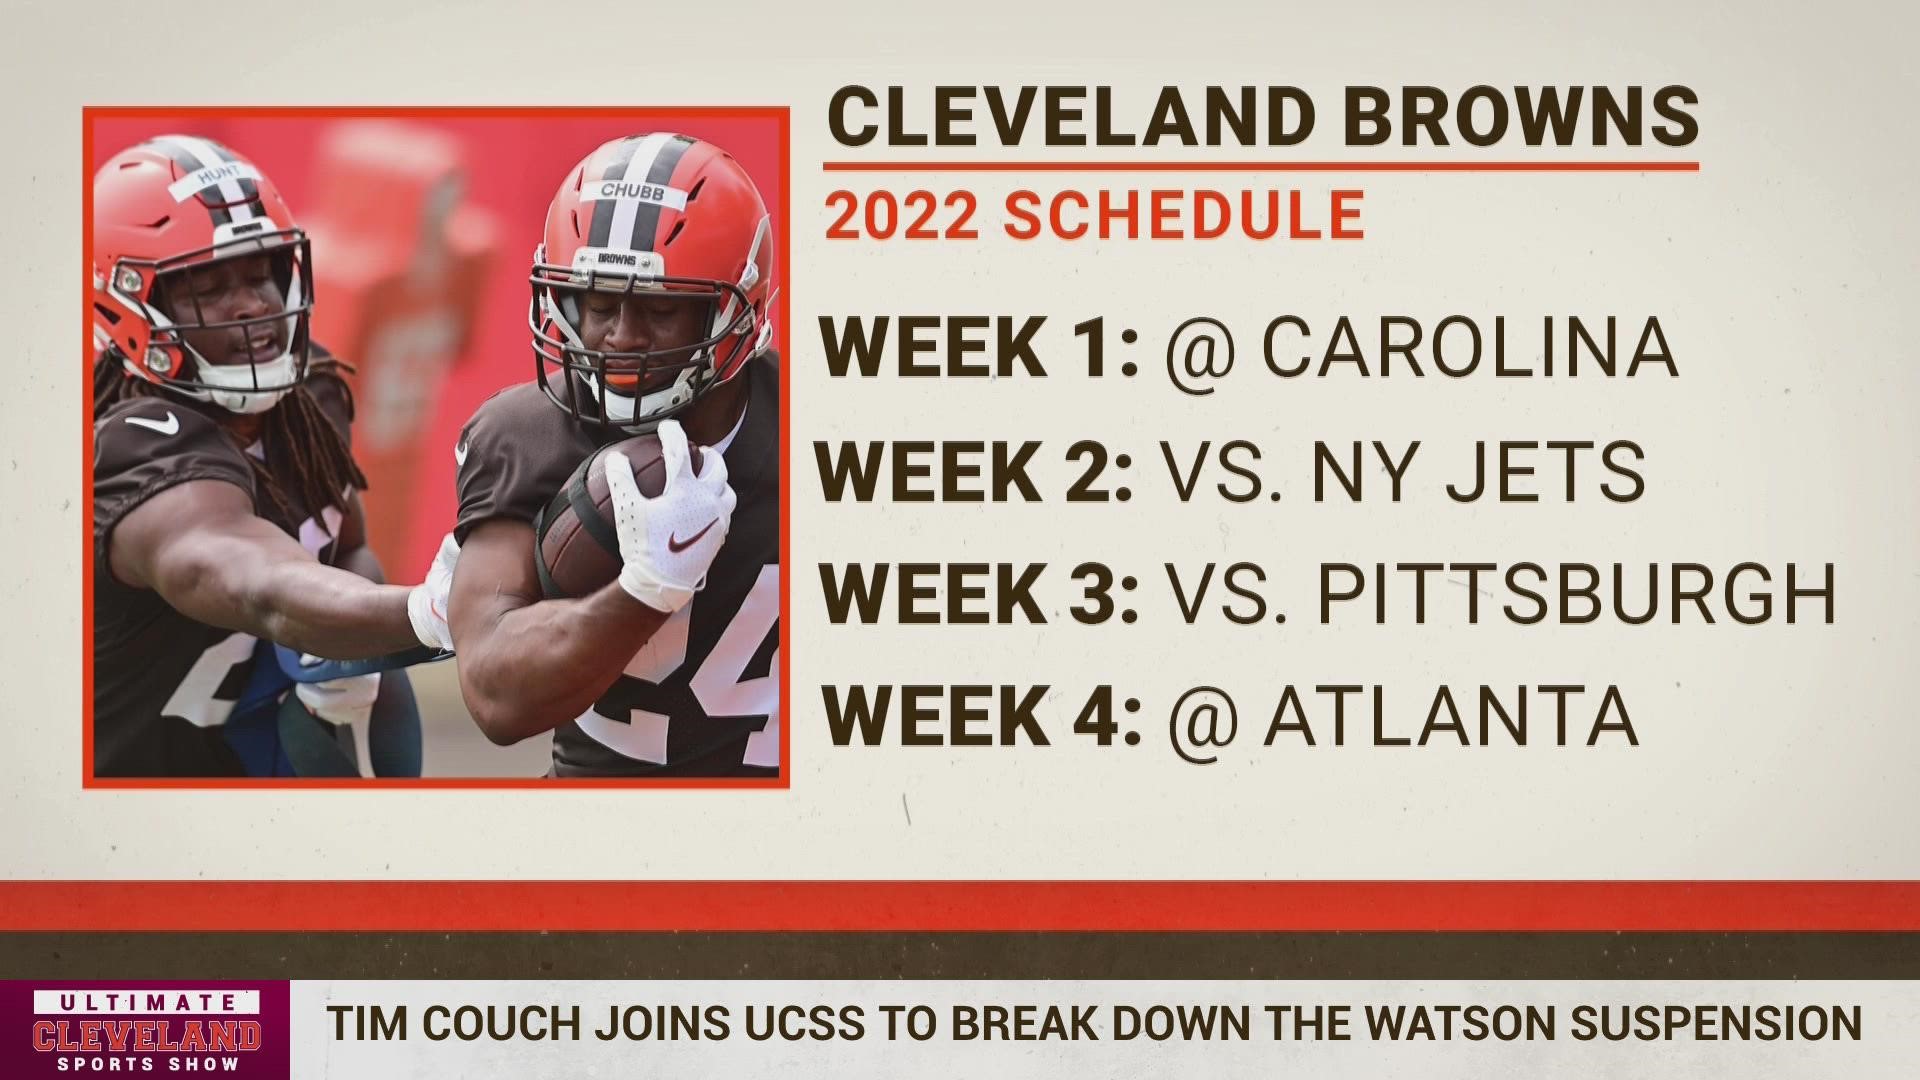 cleveland browns opponents 2022